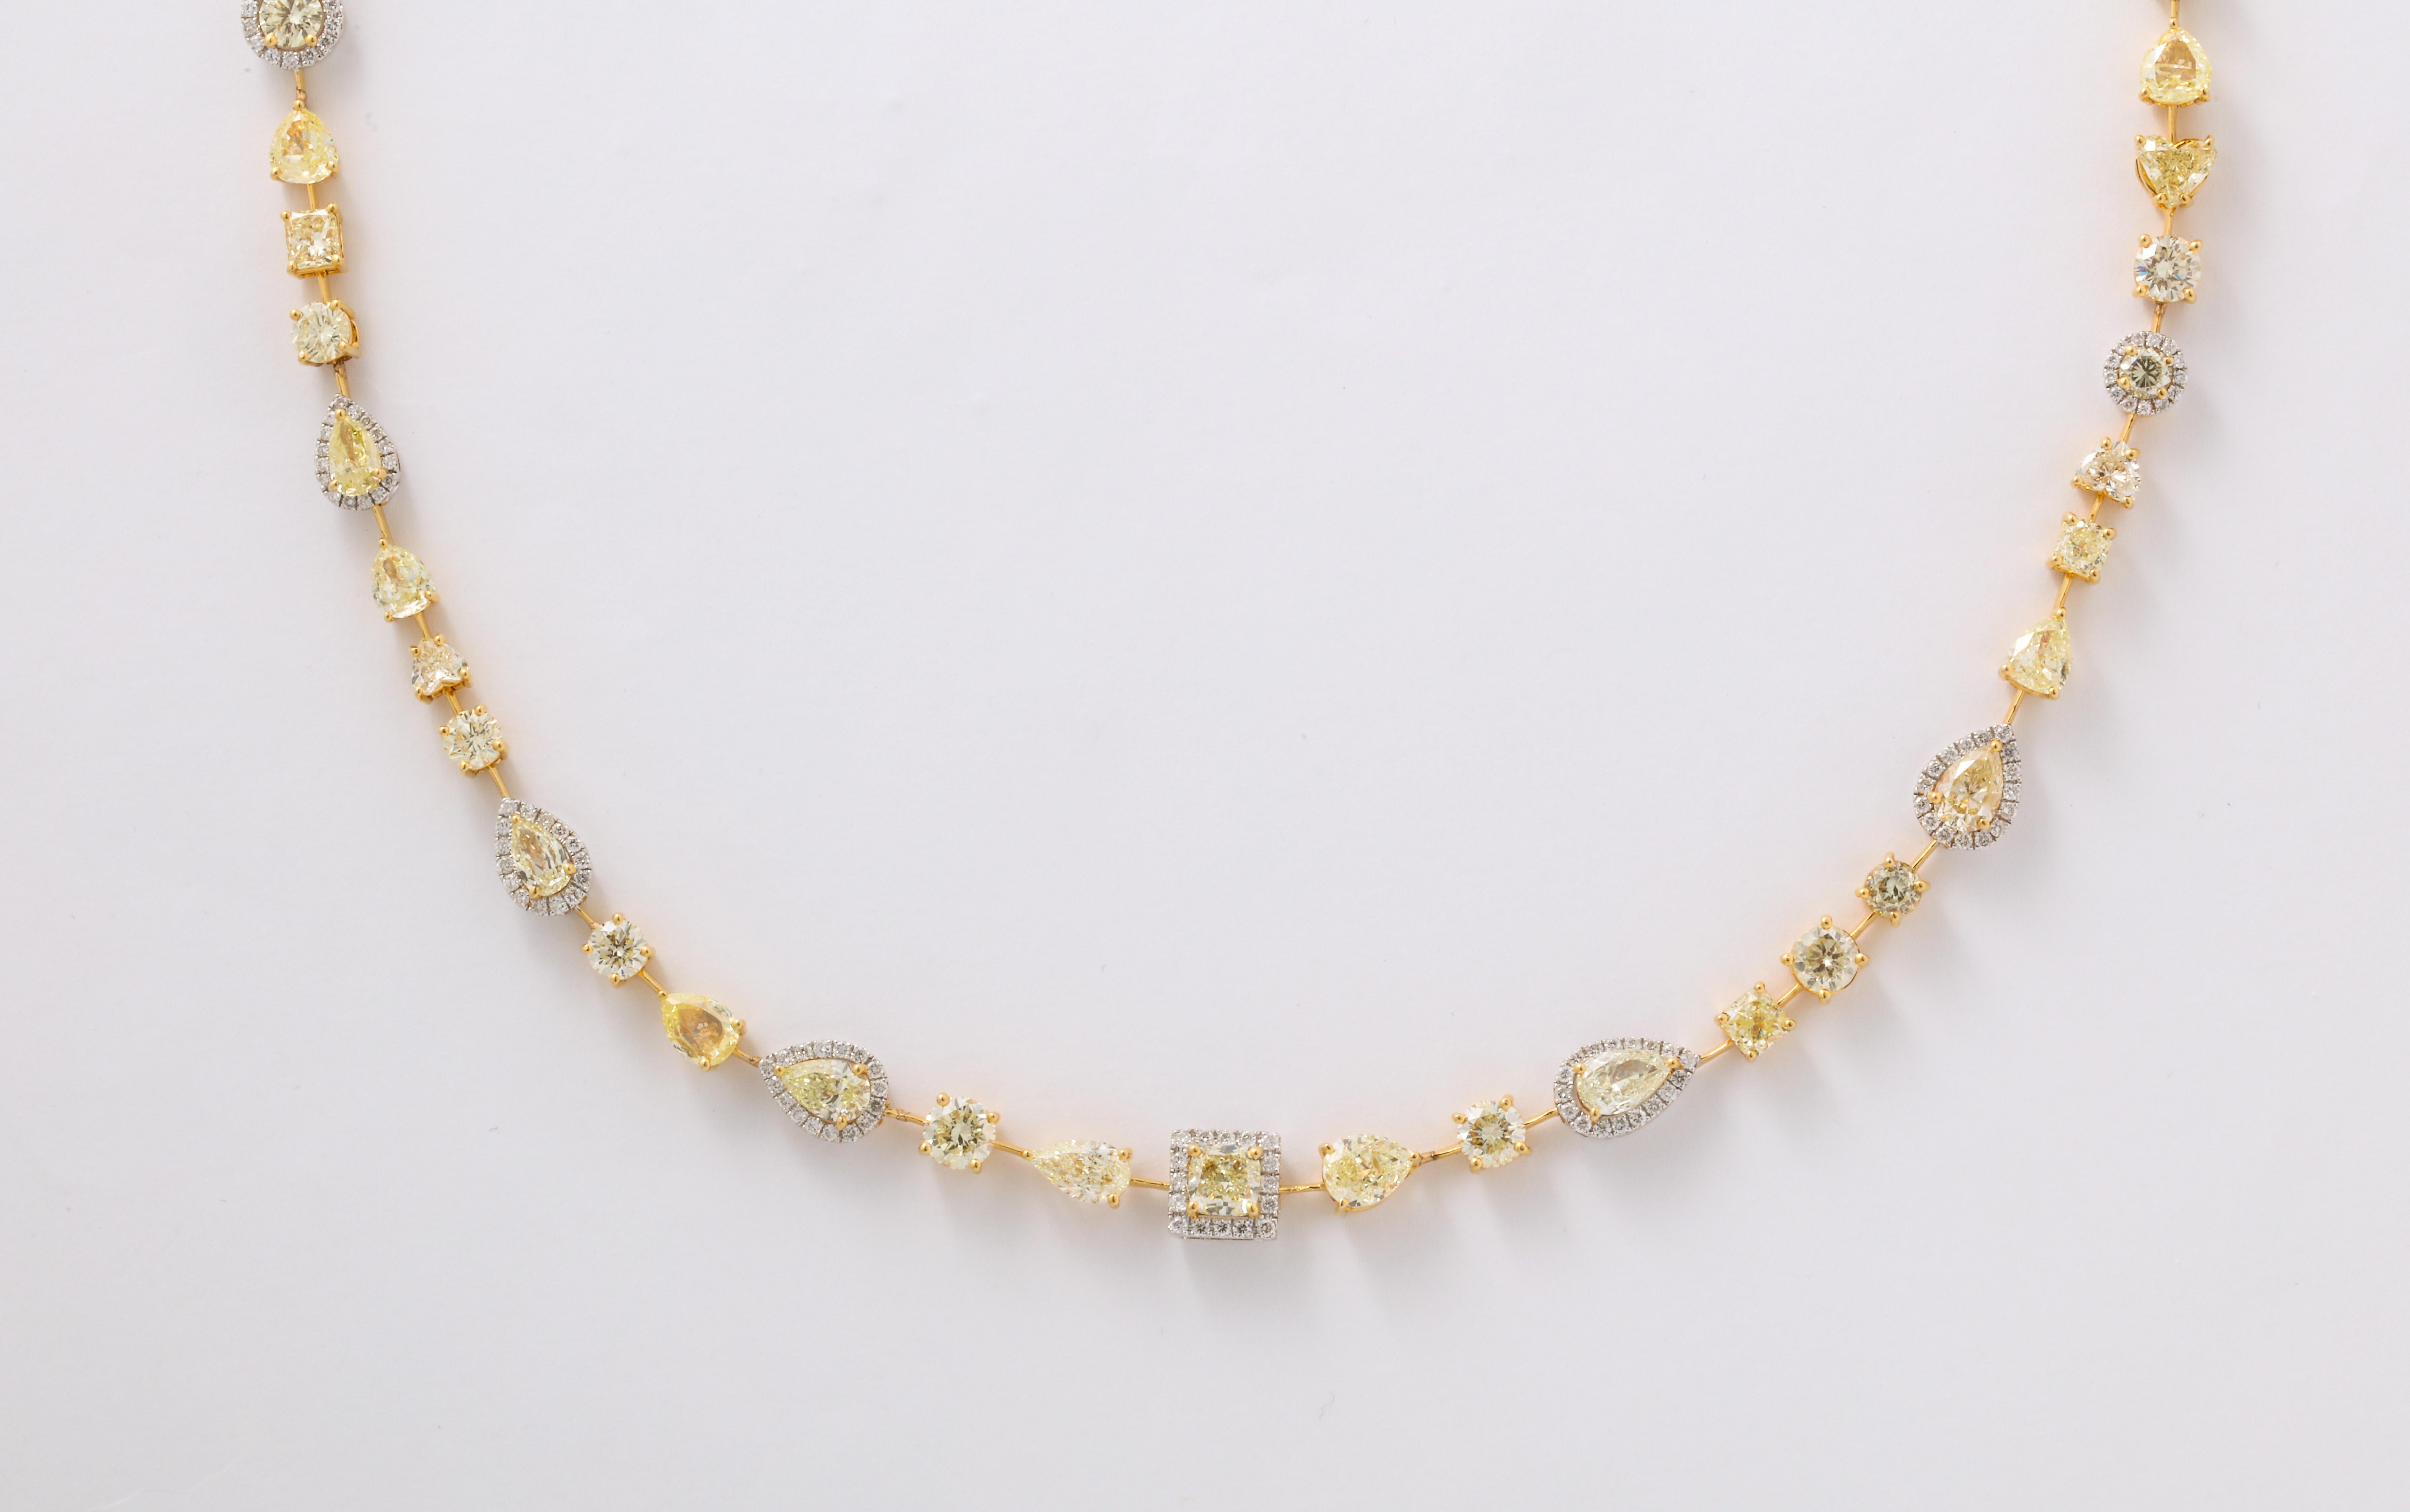 
A beautiful WEARABLE design. 

23.16 carats of yellow and white diamonds set in 18k white and yellow gold.

This necklace features heart, princess, round, pear, cushion and oval shapes. 

18.5 inch length -- Available in different lengths as well.